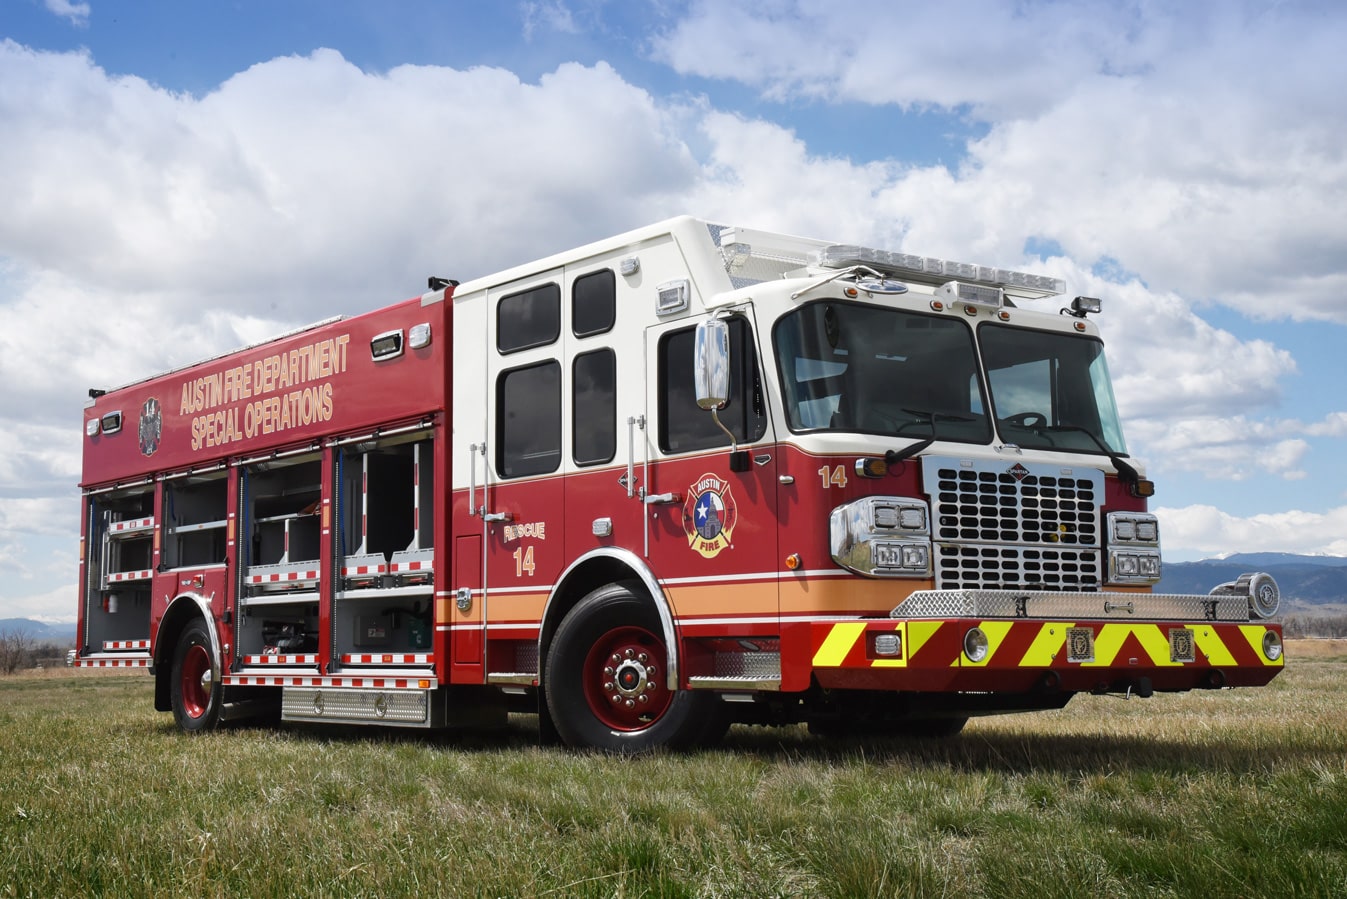 Featured image for “Austin, TX  Heavy Rescue #1118”